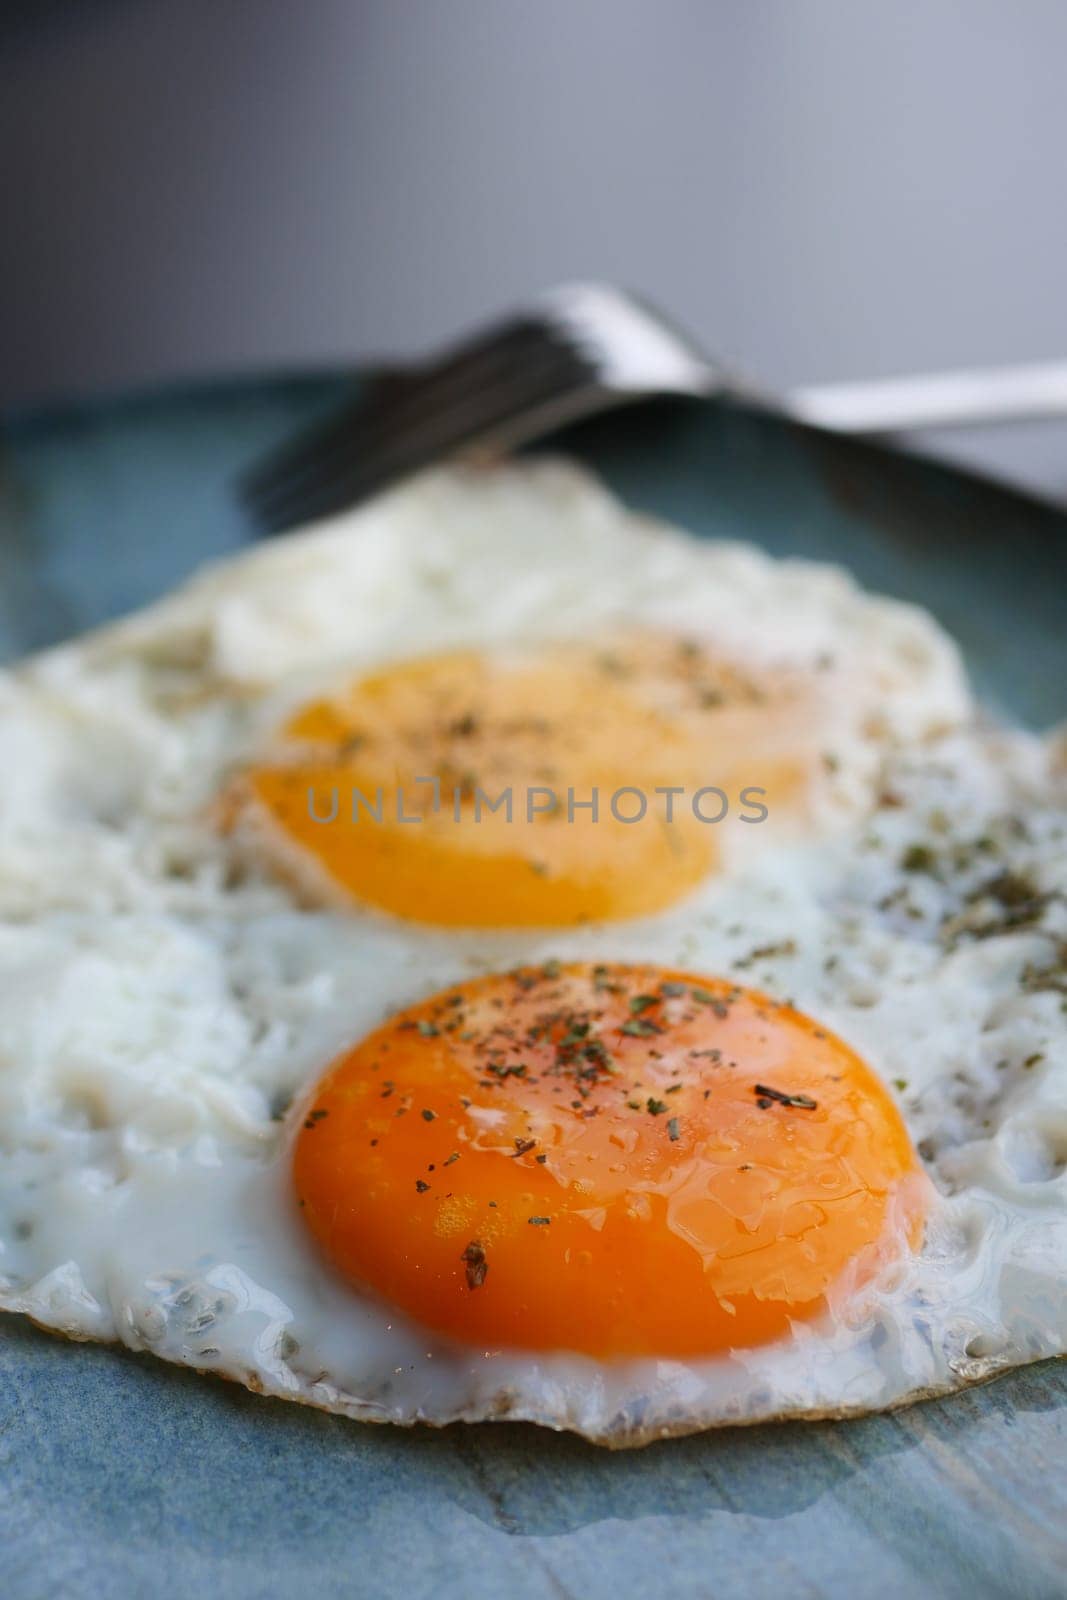 Fried eggs in the plate close up ,,